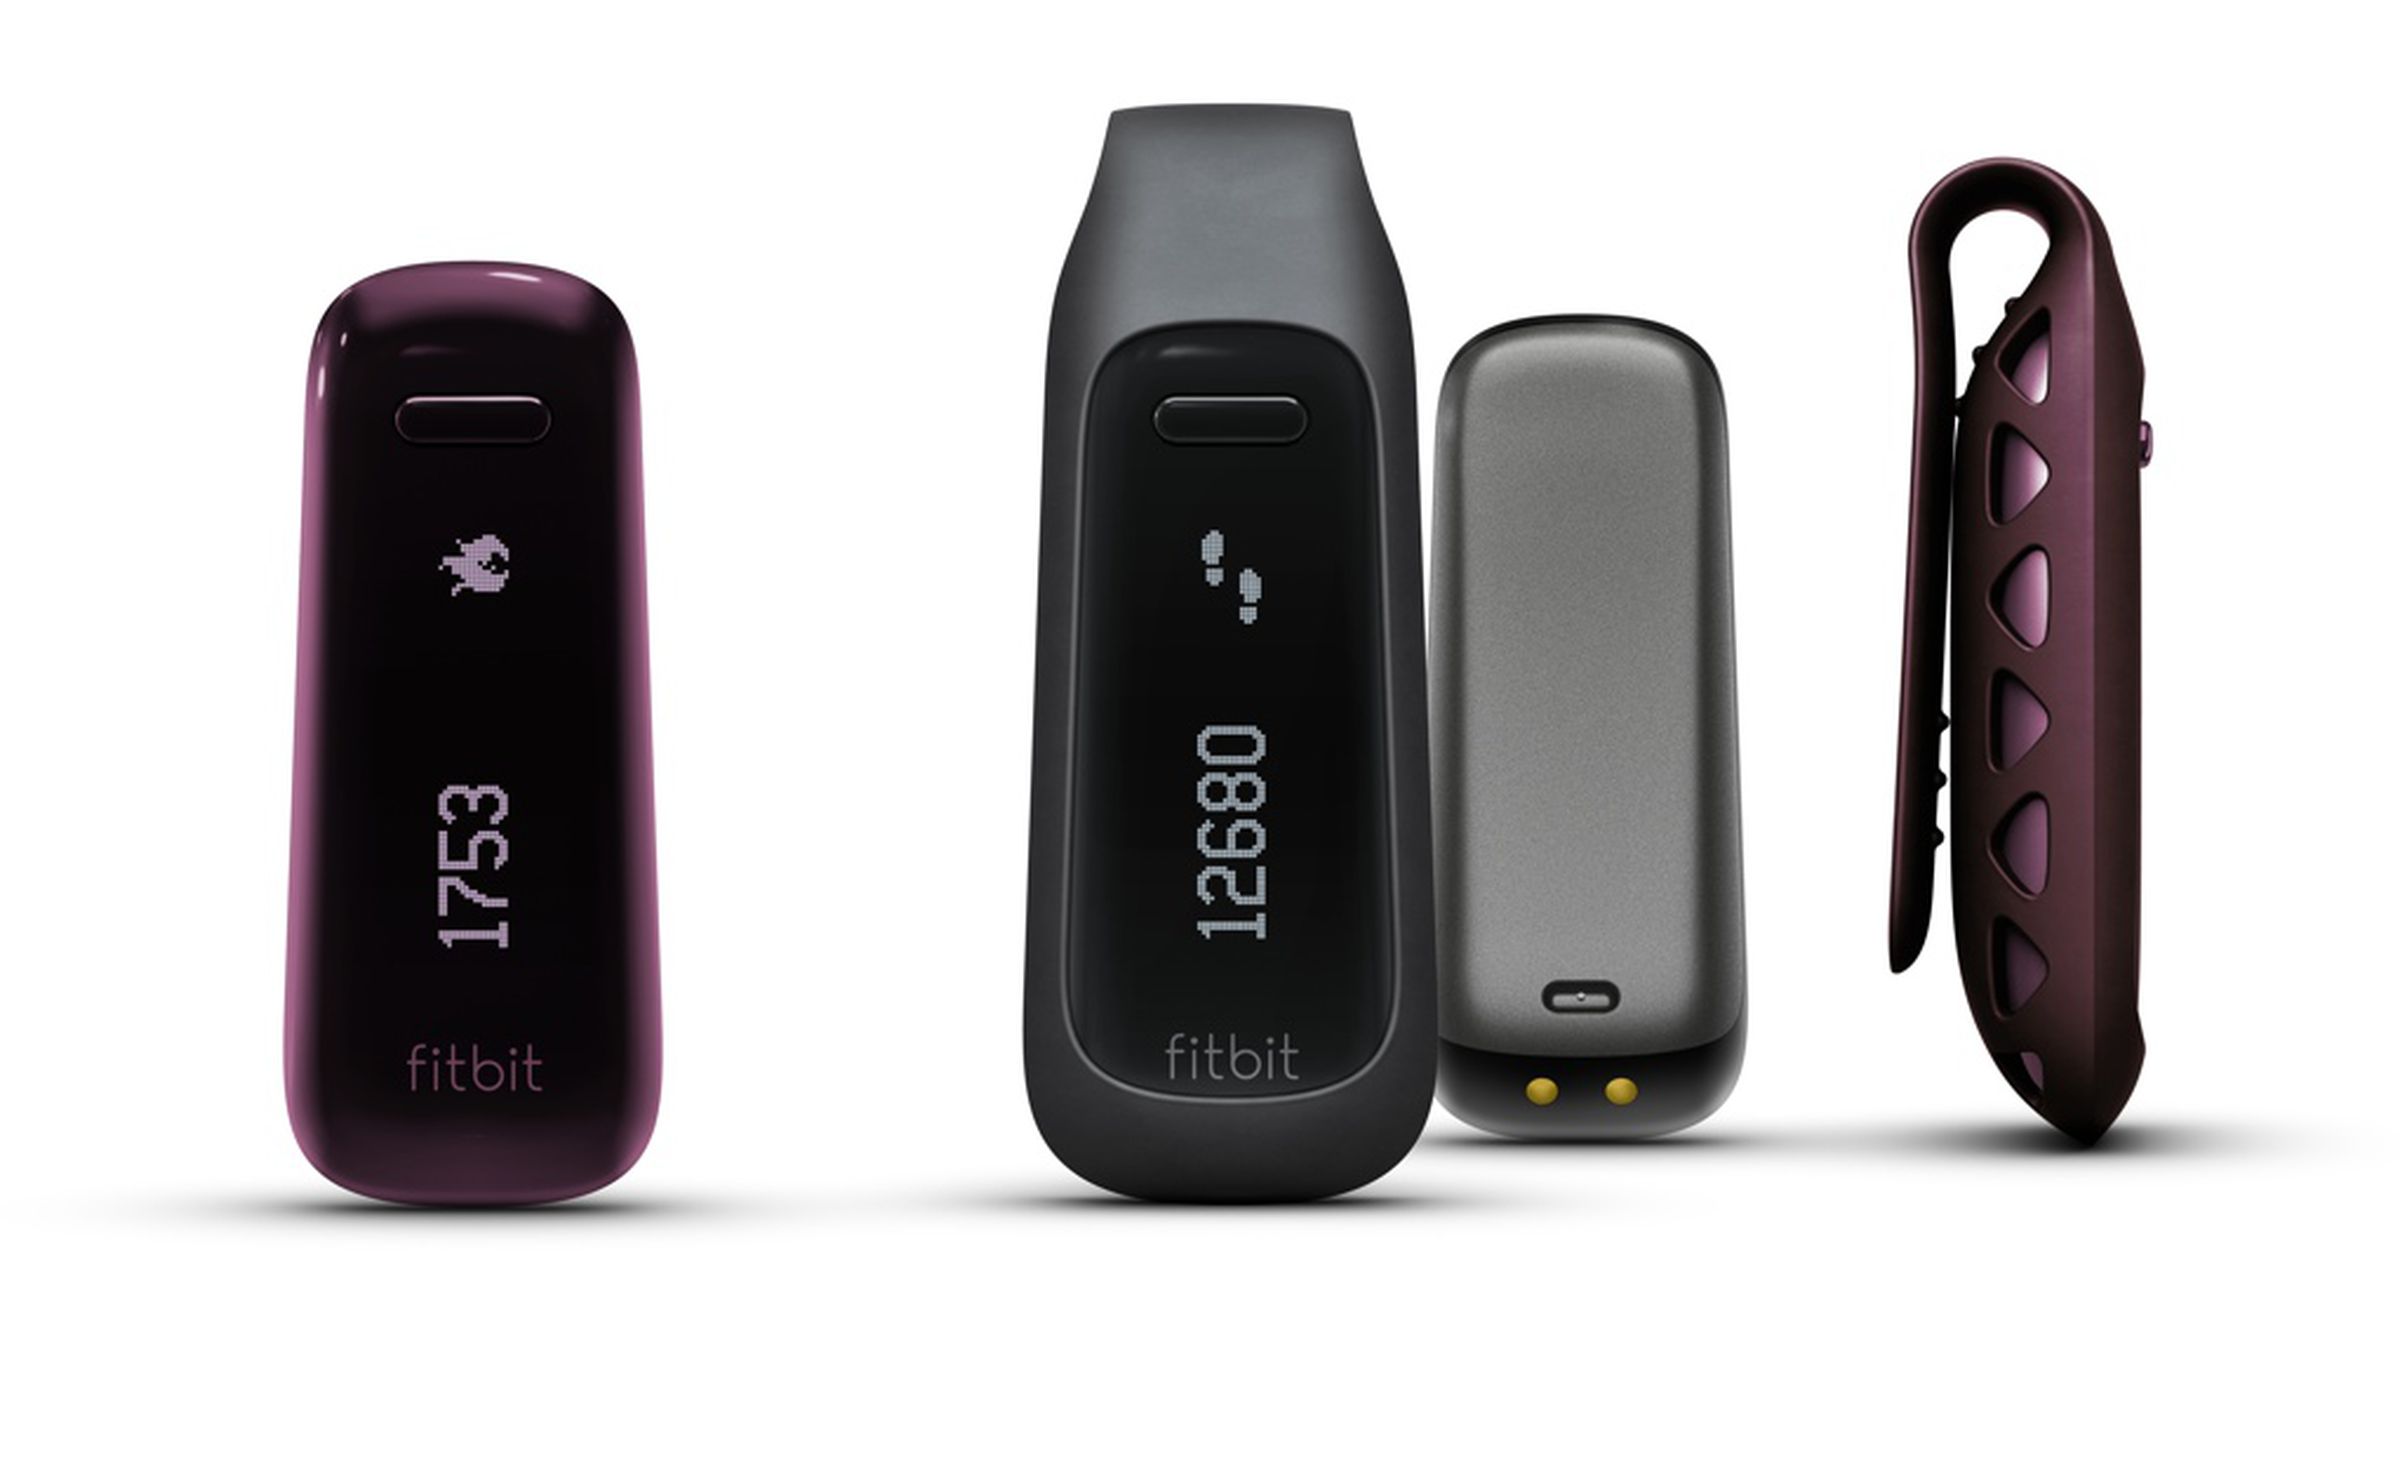 Fitbit One and Zip hands-on and press image gallery